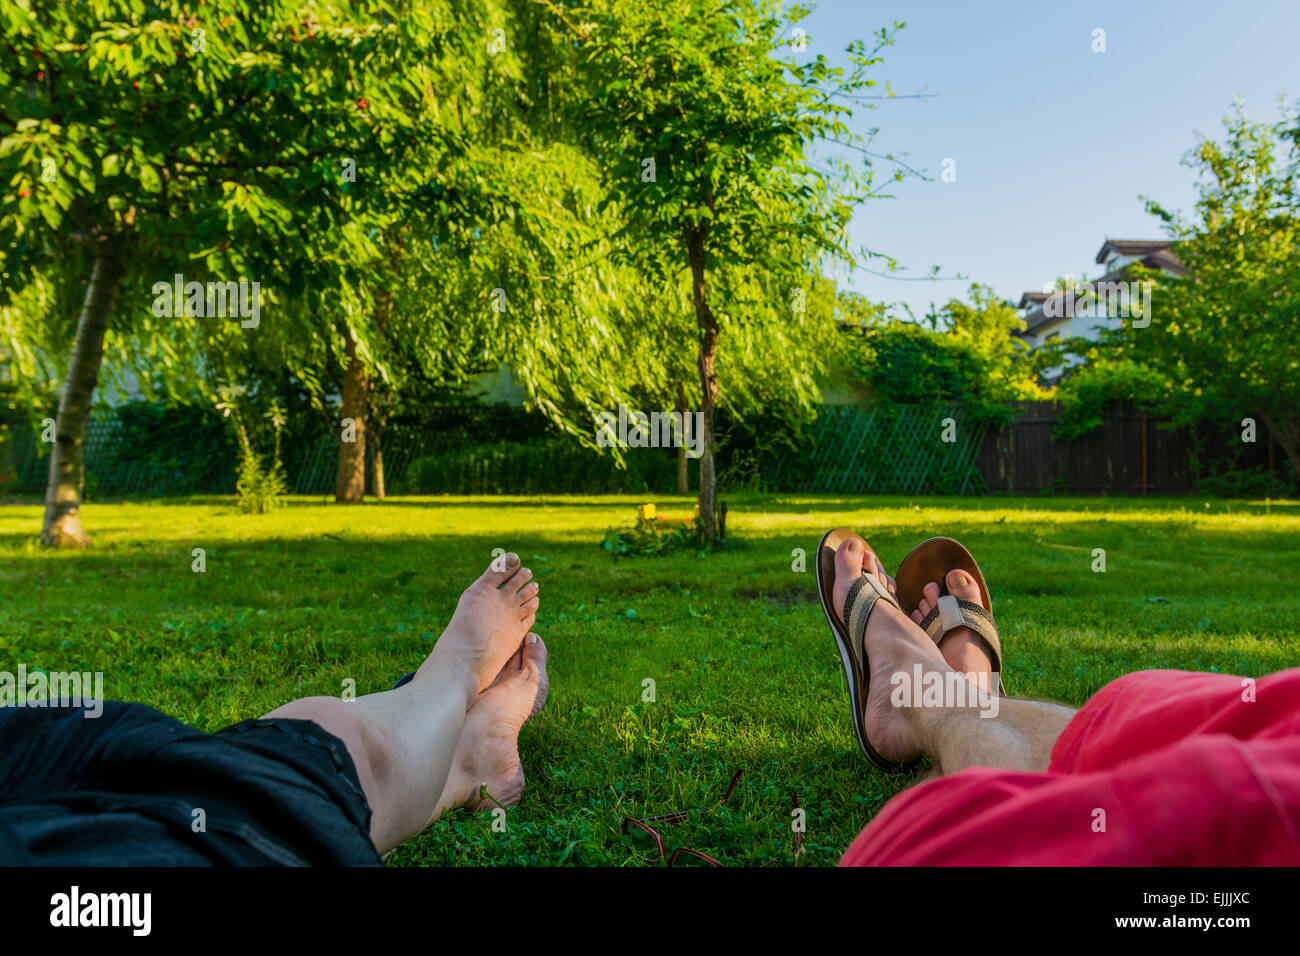 Relaxation concept. Lying on the grass. Stock Photo